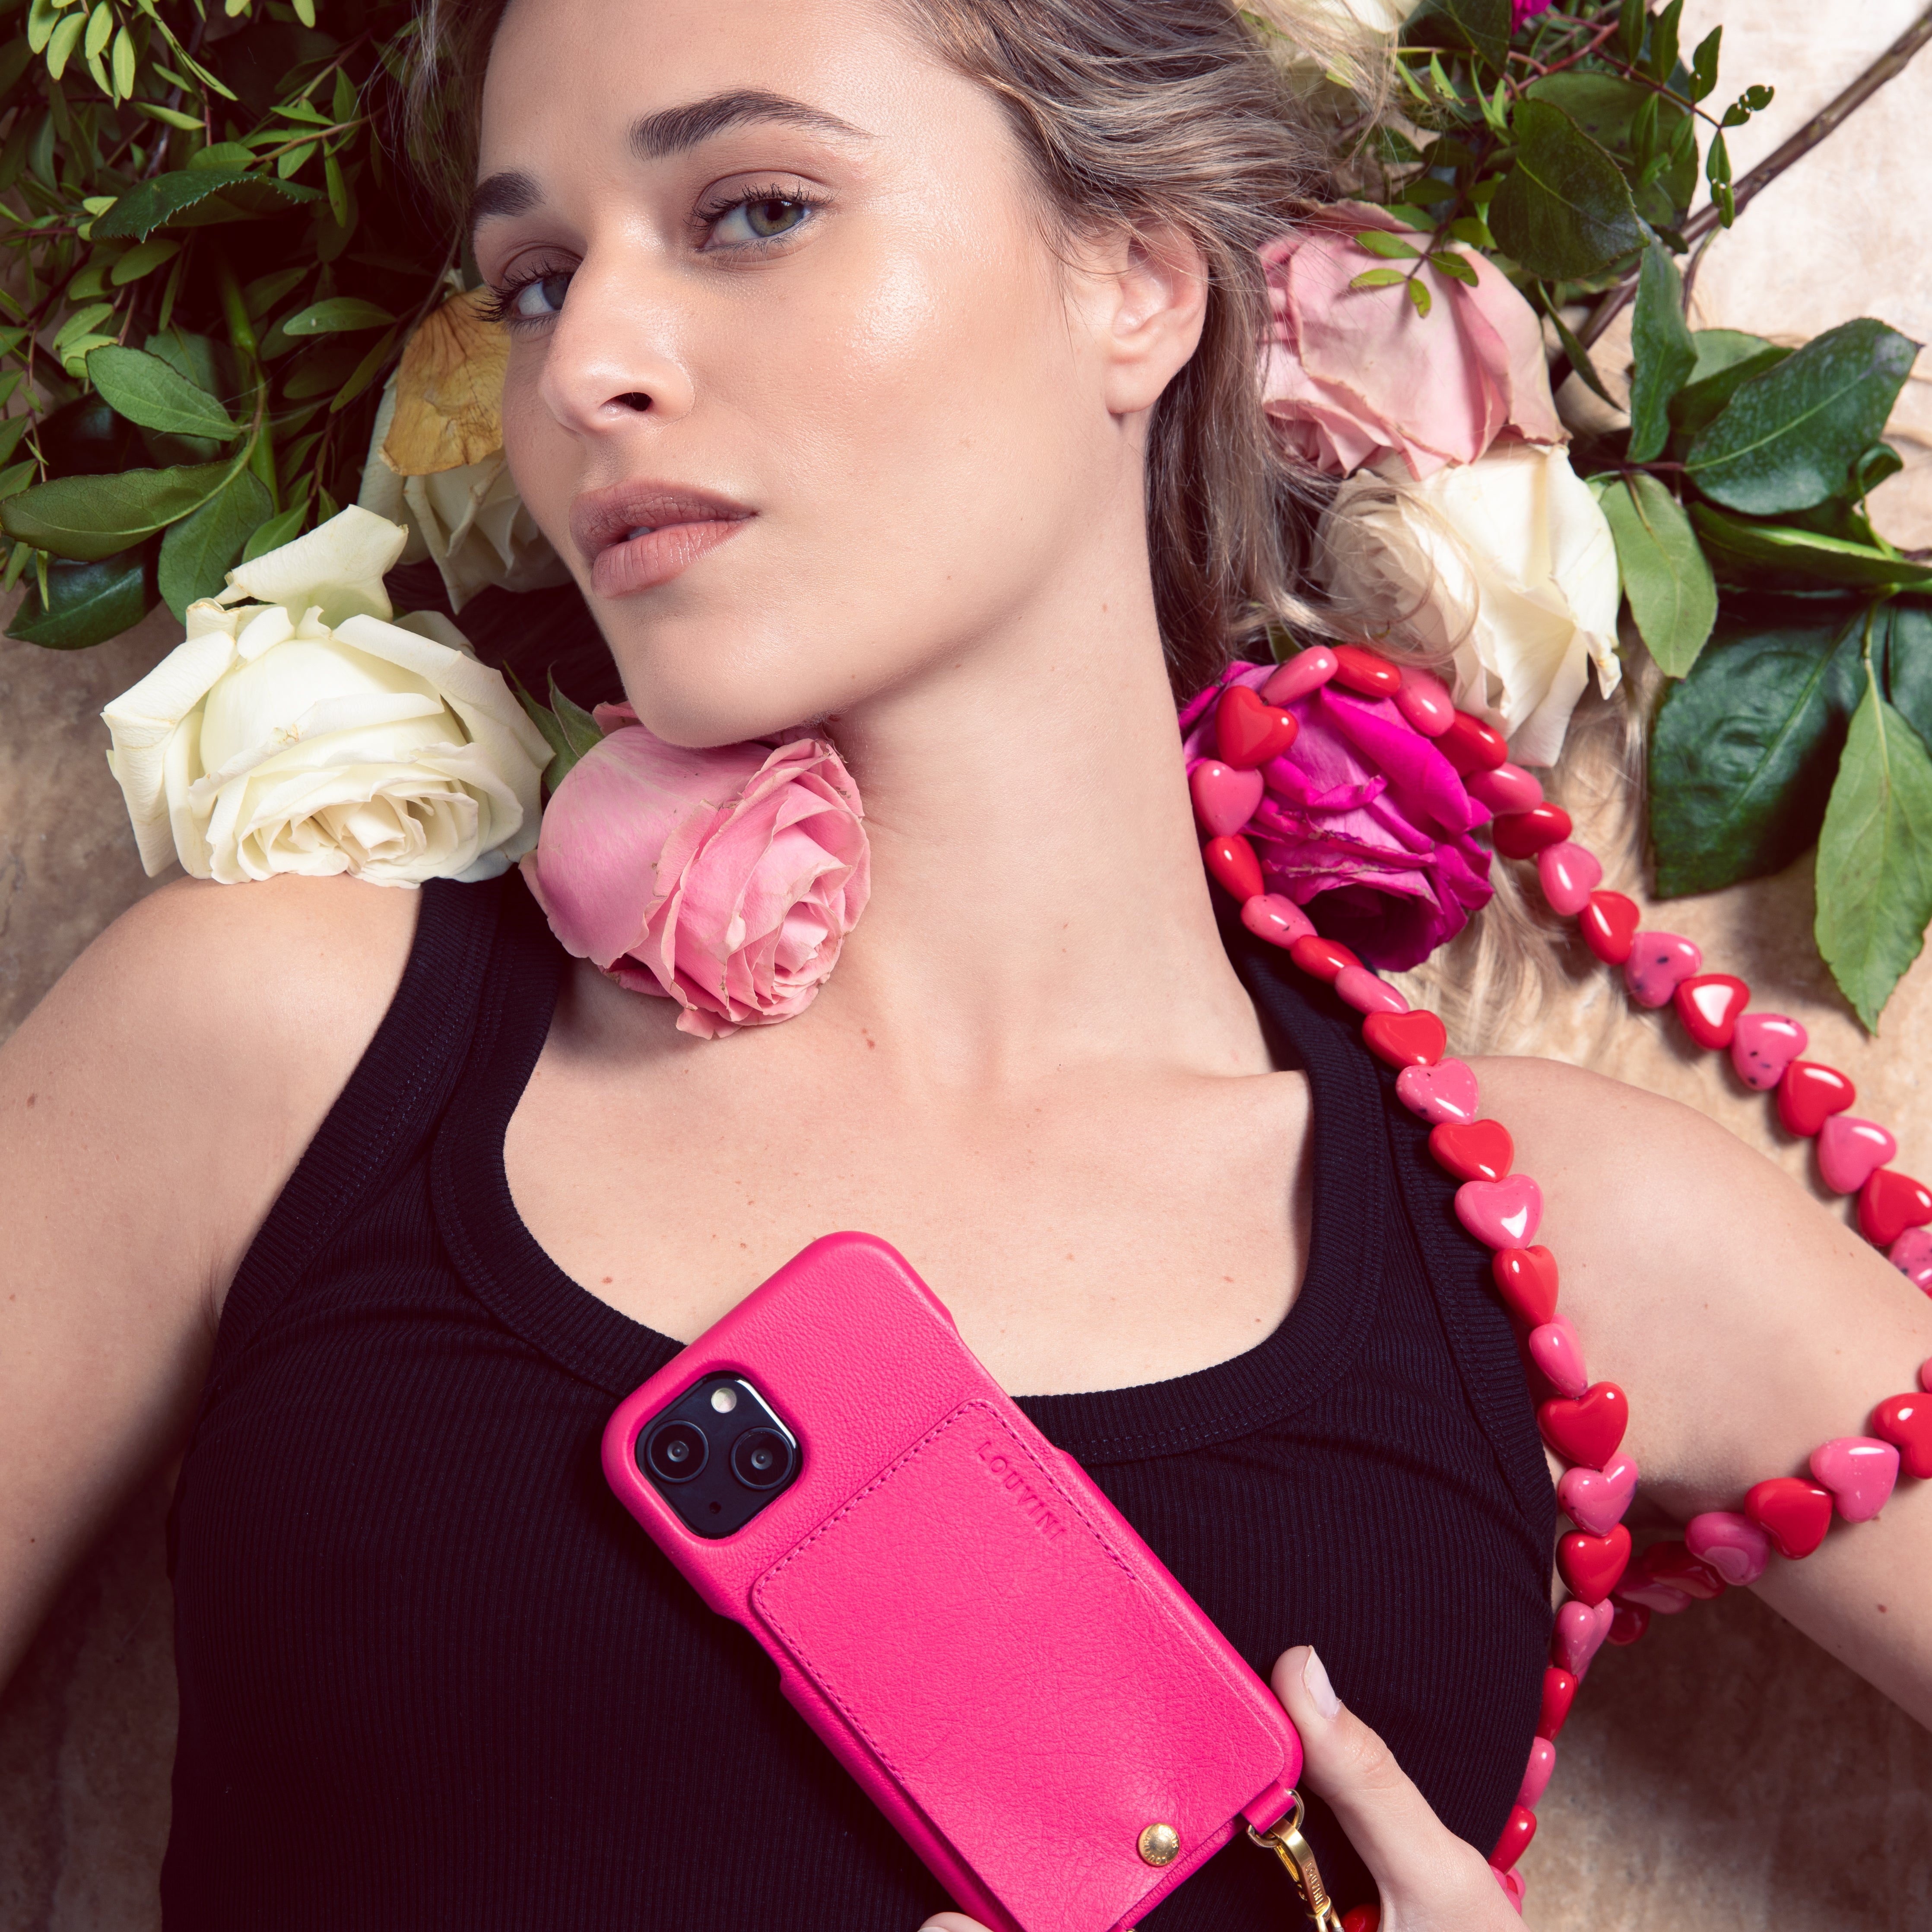 LOU Fuchsia Leather Case & CUORE Pink-Red Chain